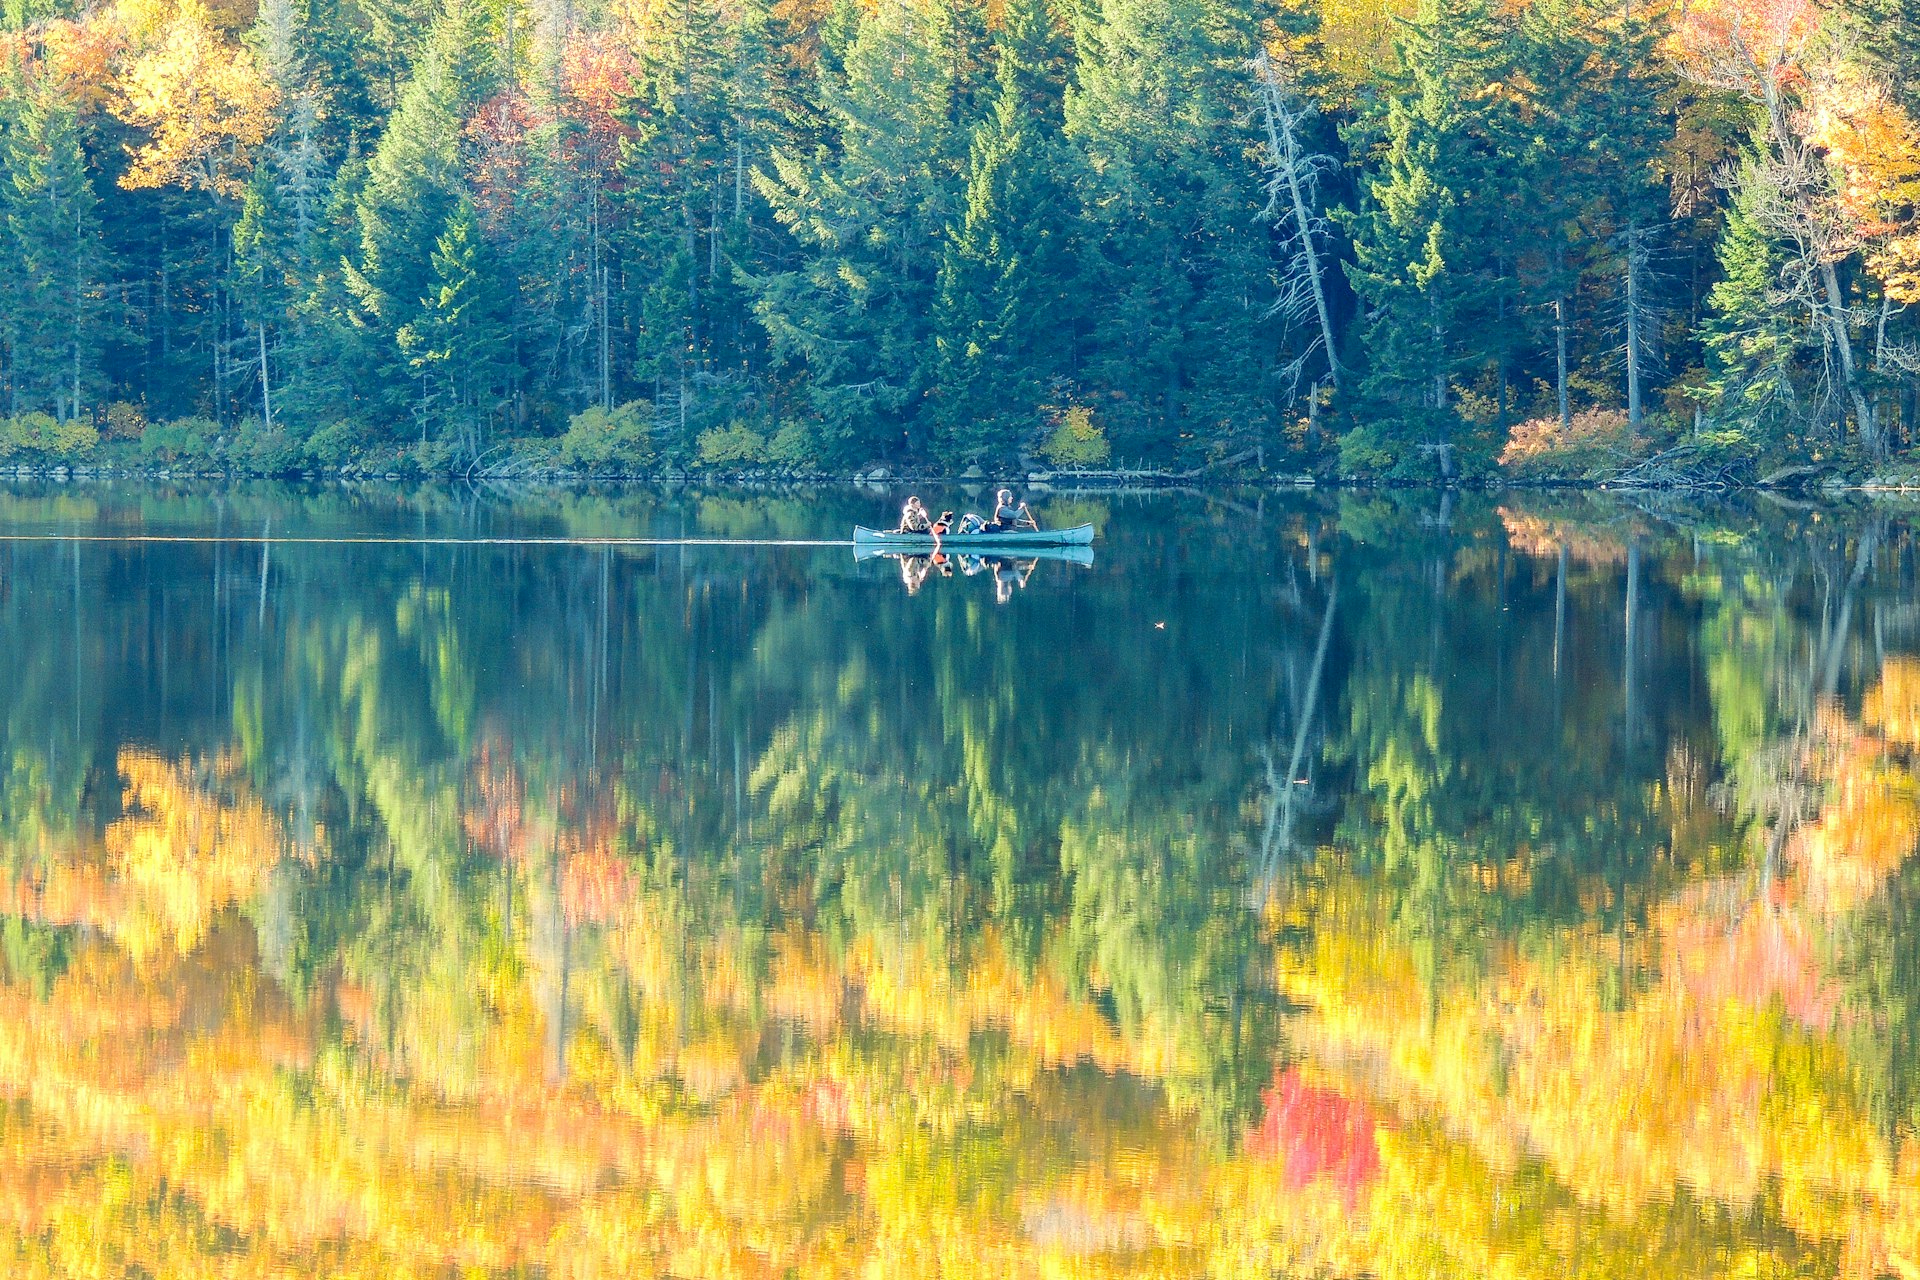 A canoe paddles through a bright yellow reflection of fall foliage on a Grout Pond in the Green Mountain National Forest in Vermont